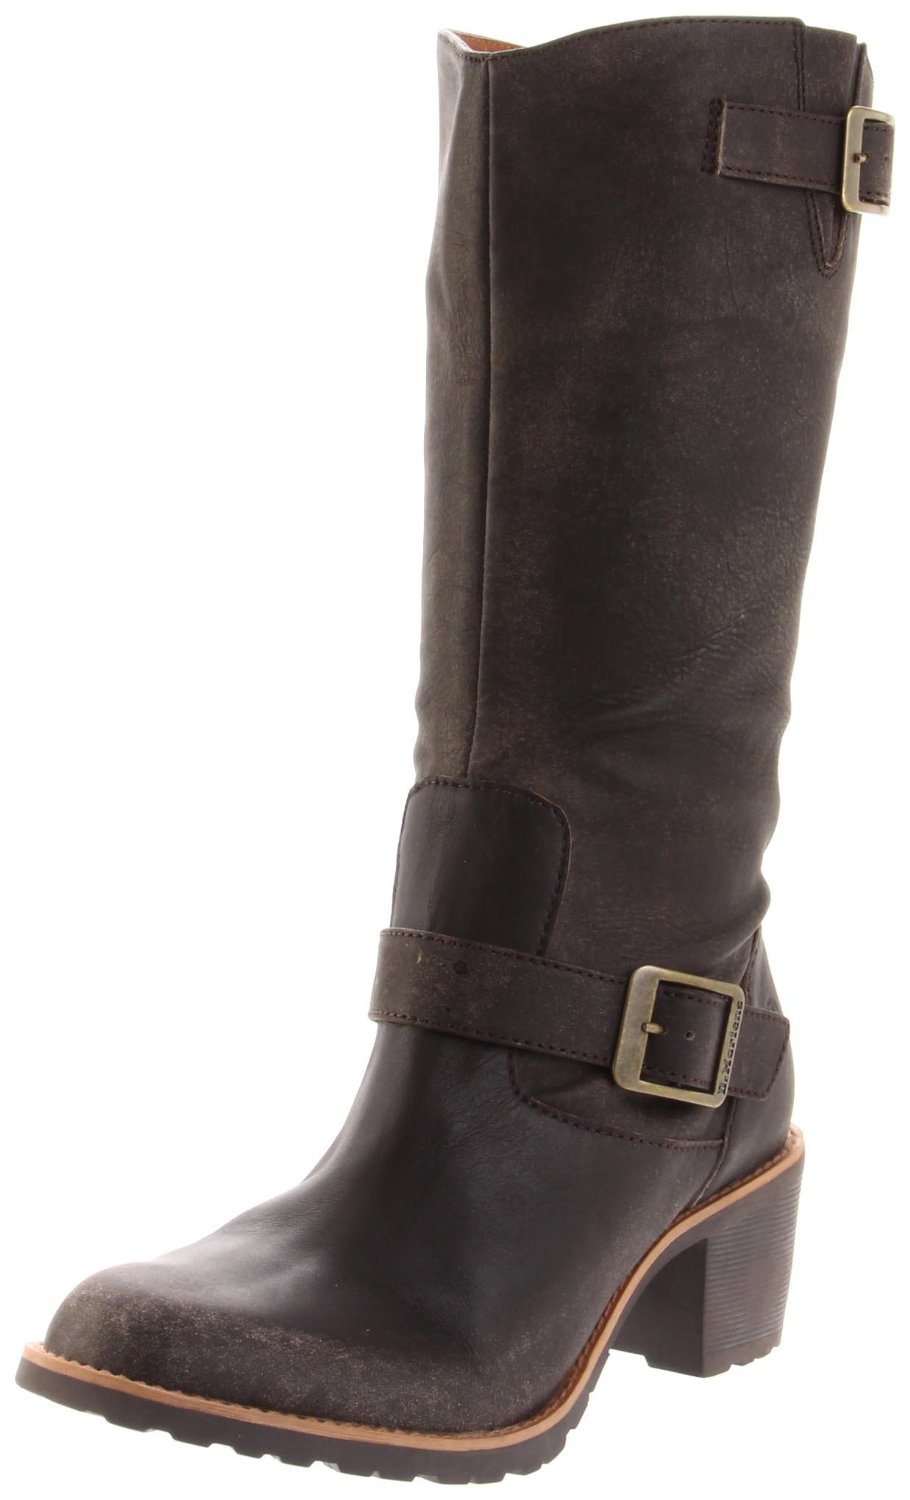 Modern Country Style: My Top 10 Knee High Boots